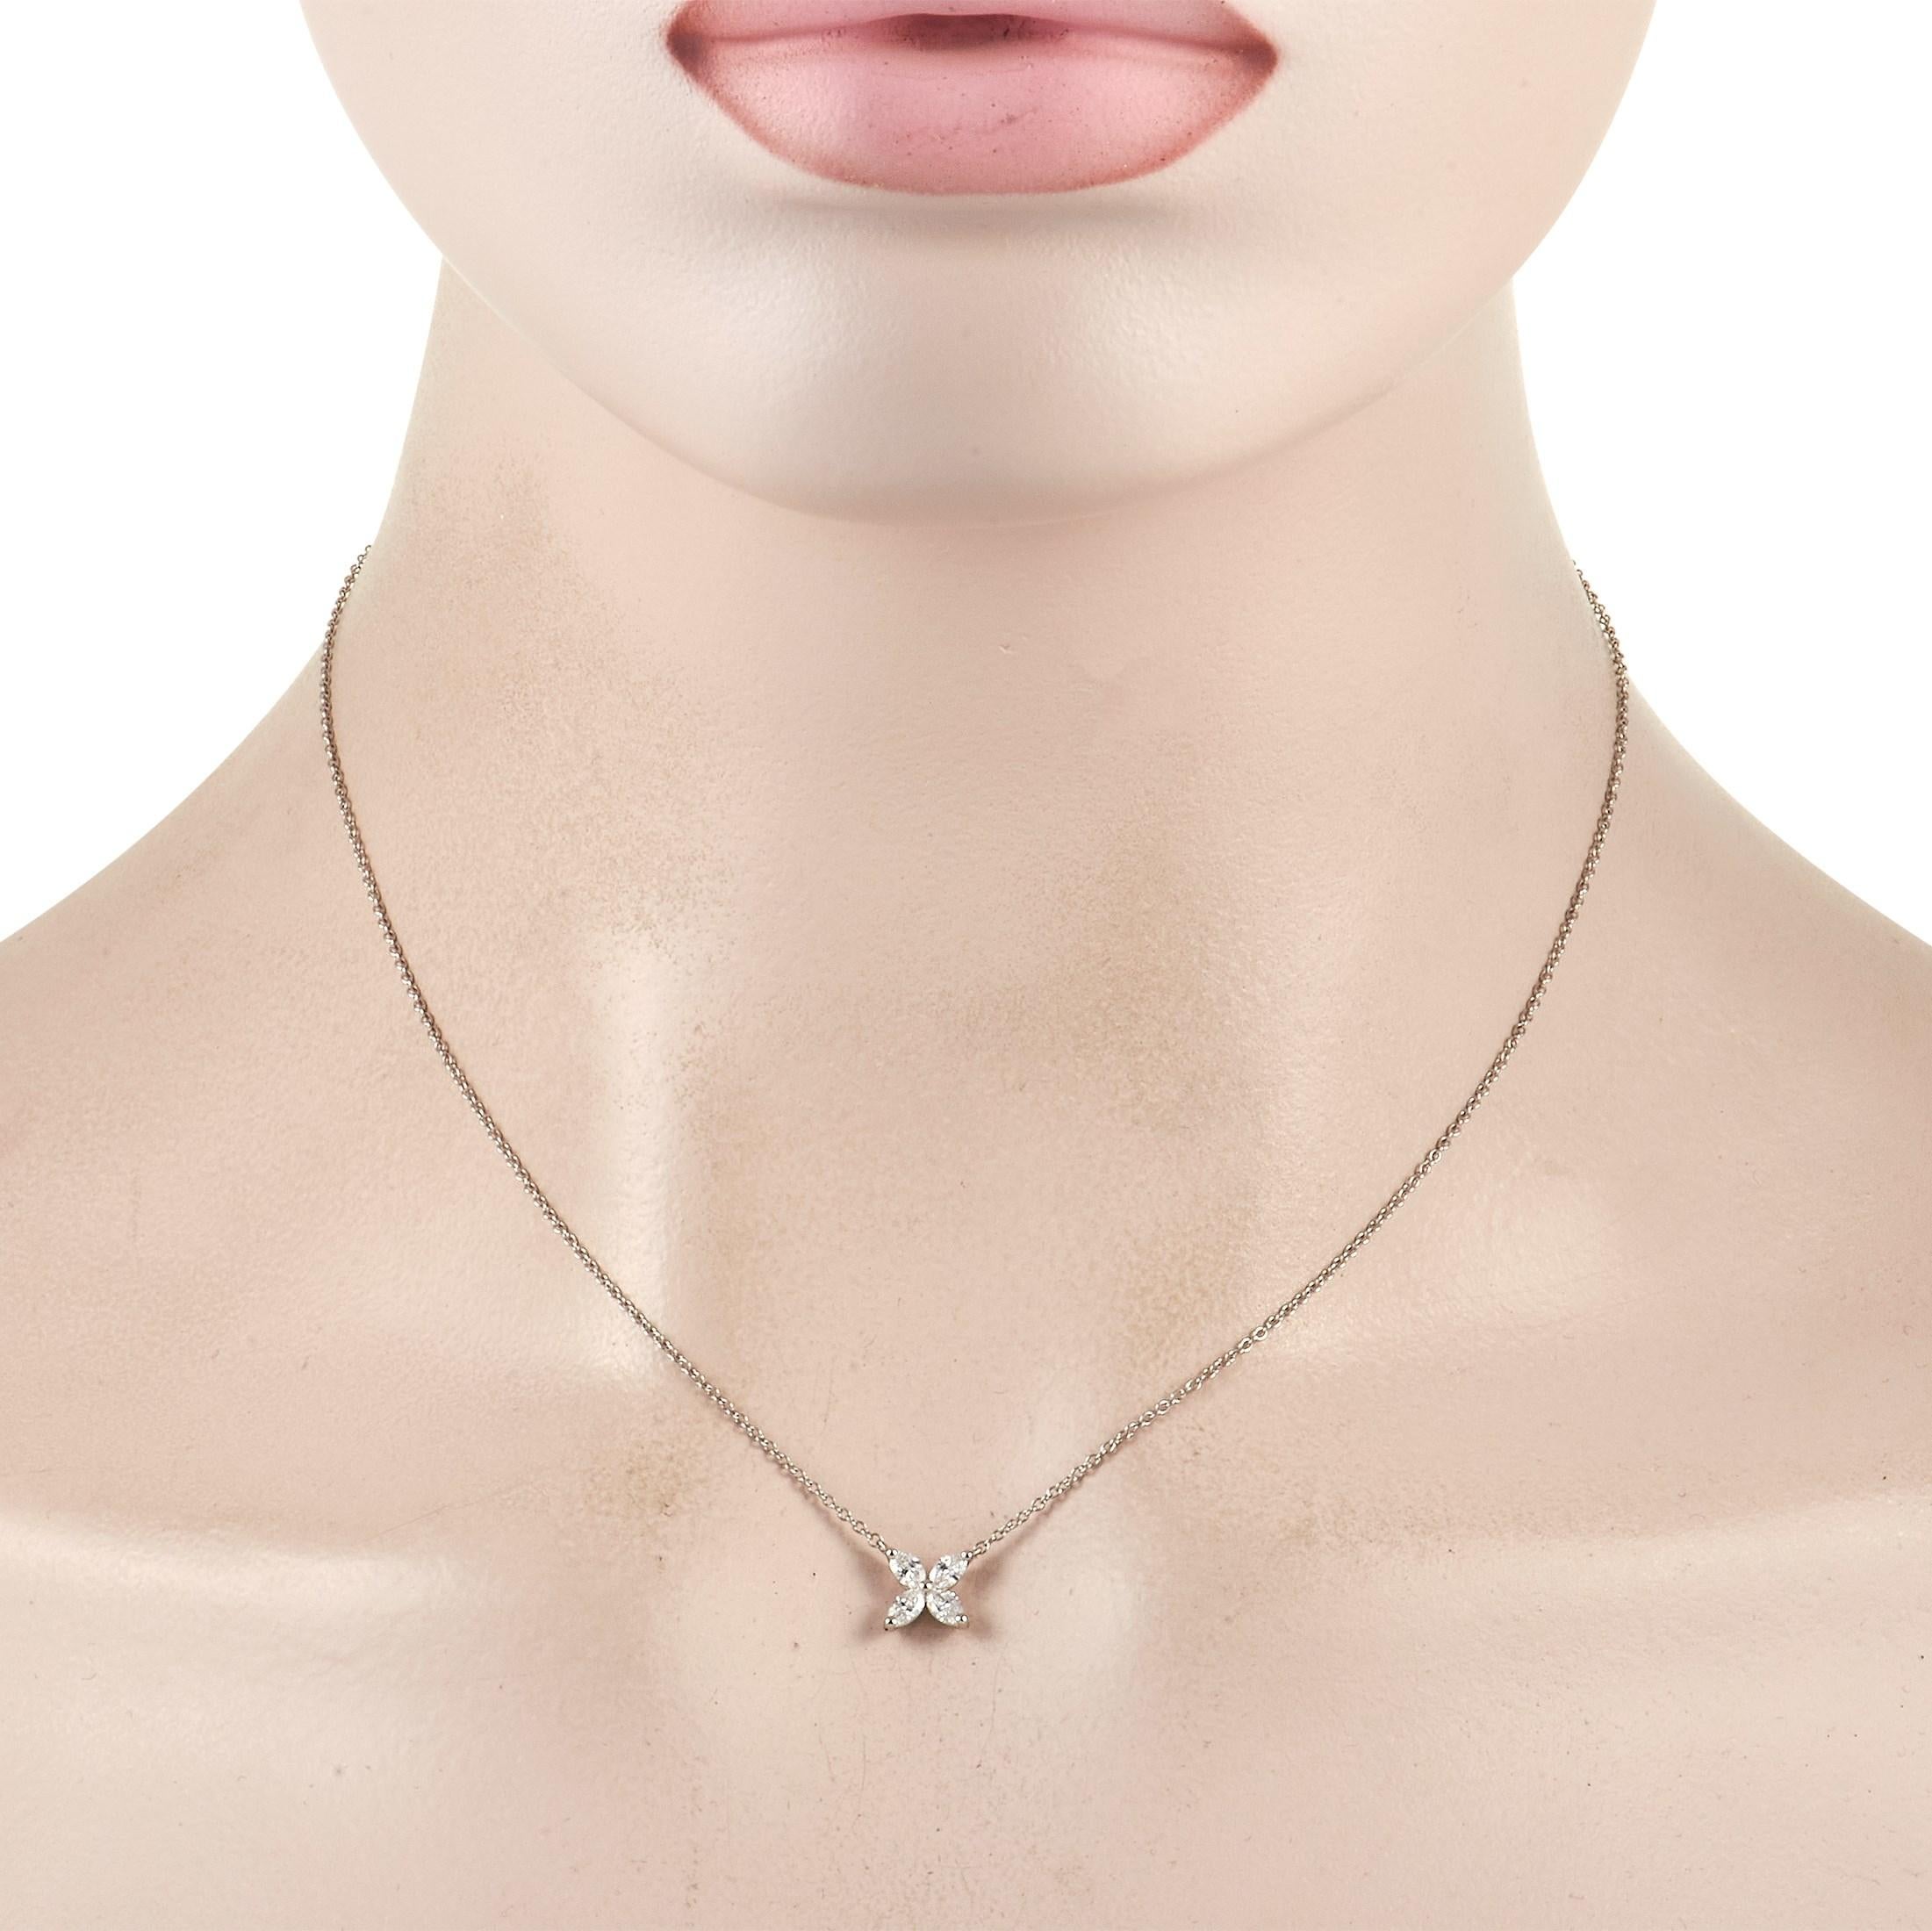 This simple, sophisticated necklace from the Tiffany & Co. Victoria collection will continually impress. Suspended at the center of a 16” chain, you’ll find four marquise-cut diamonds totaling 0.32 carats arranged in a flower motif that measures